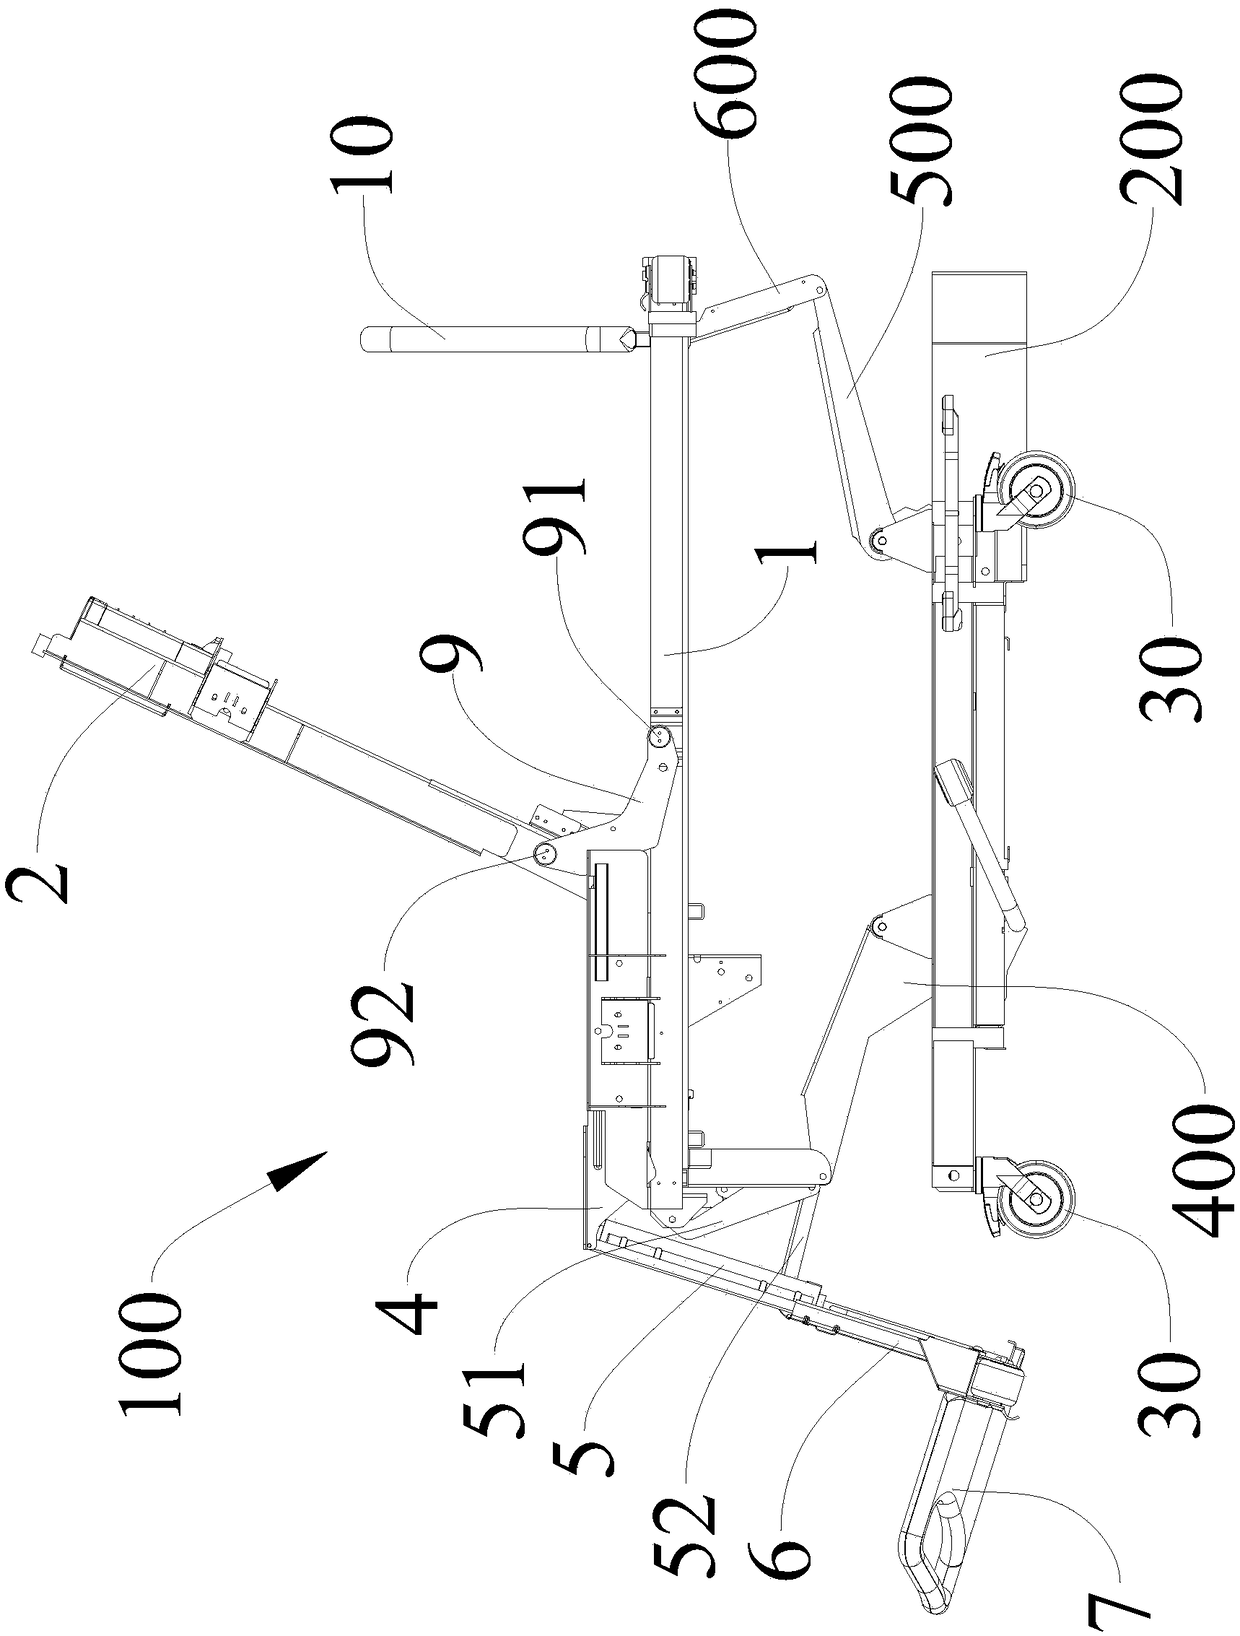 Medical bed and adjustable bed board thereof